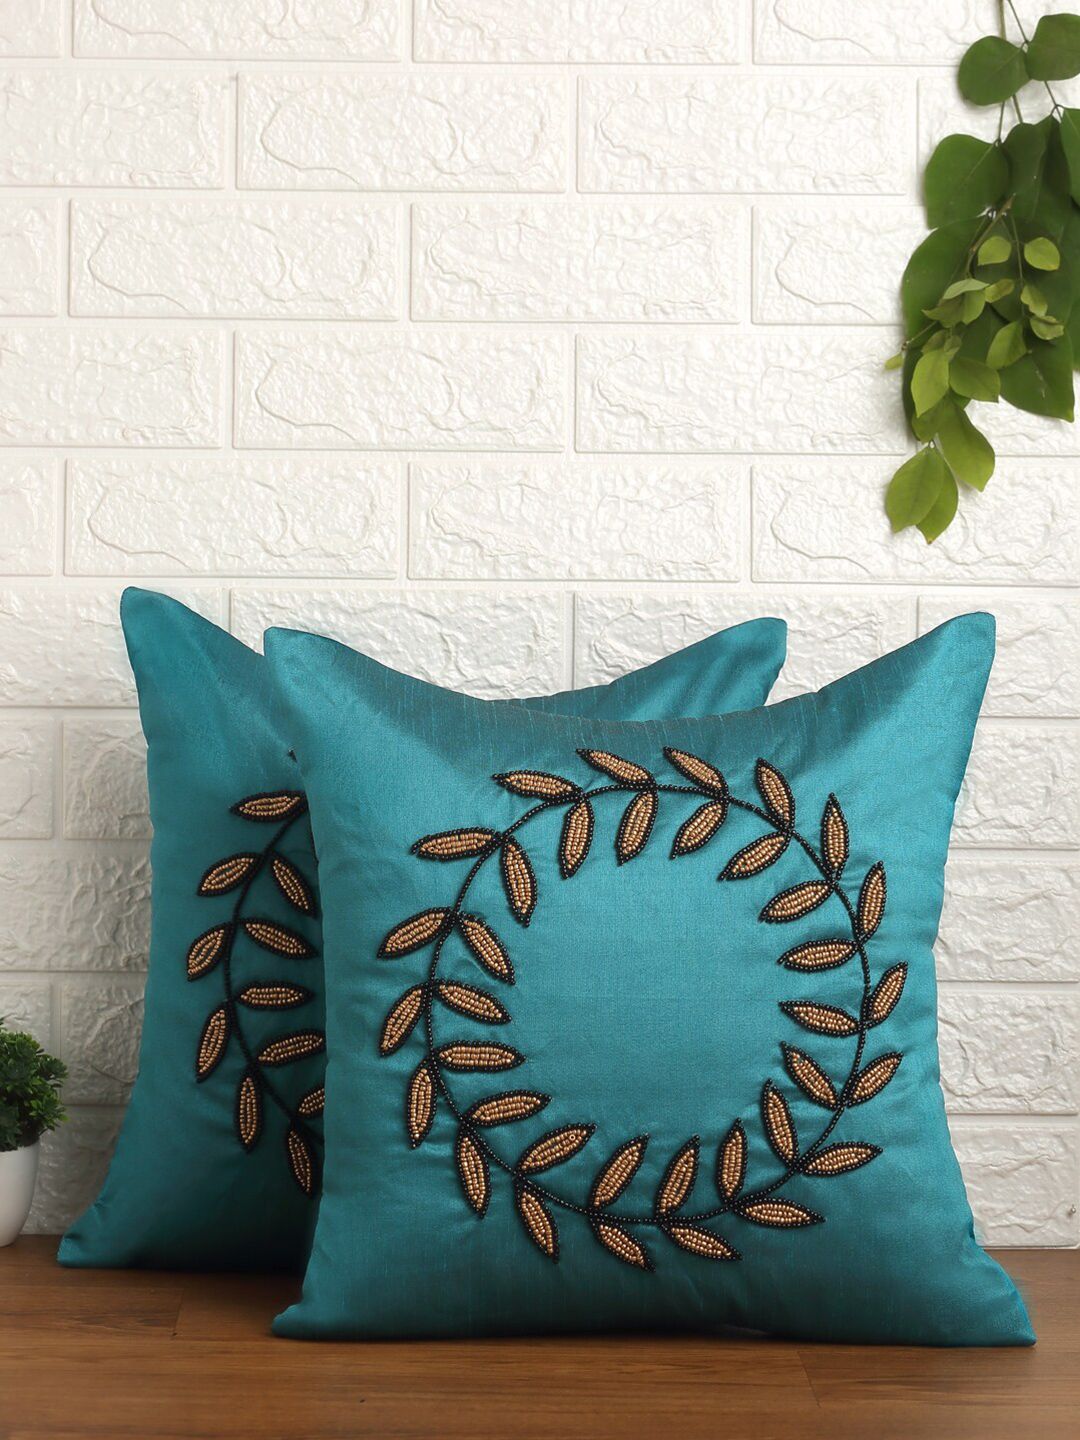 Alina decor Teal & Black Set of 2 Embroidered Square Cushion Covers Price in India